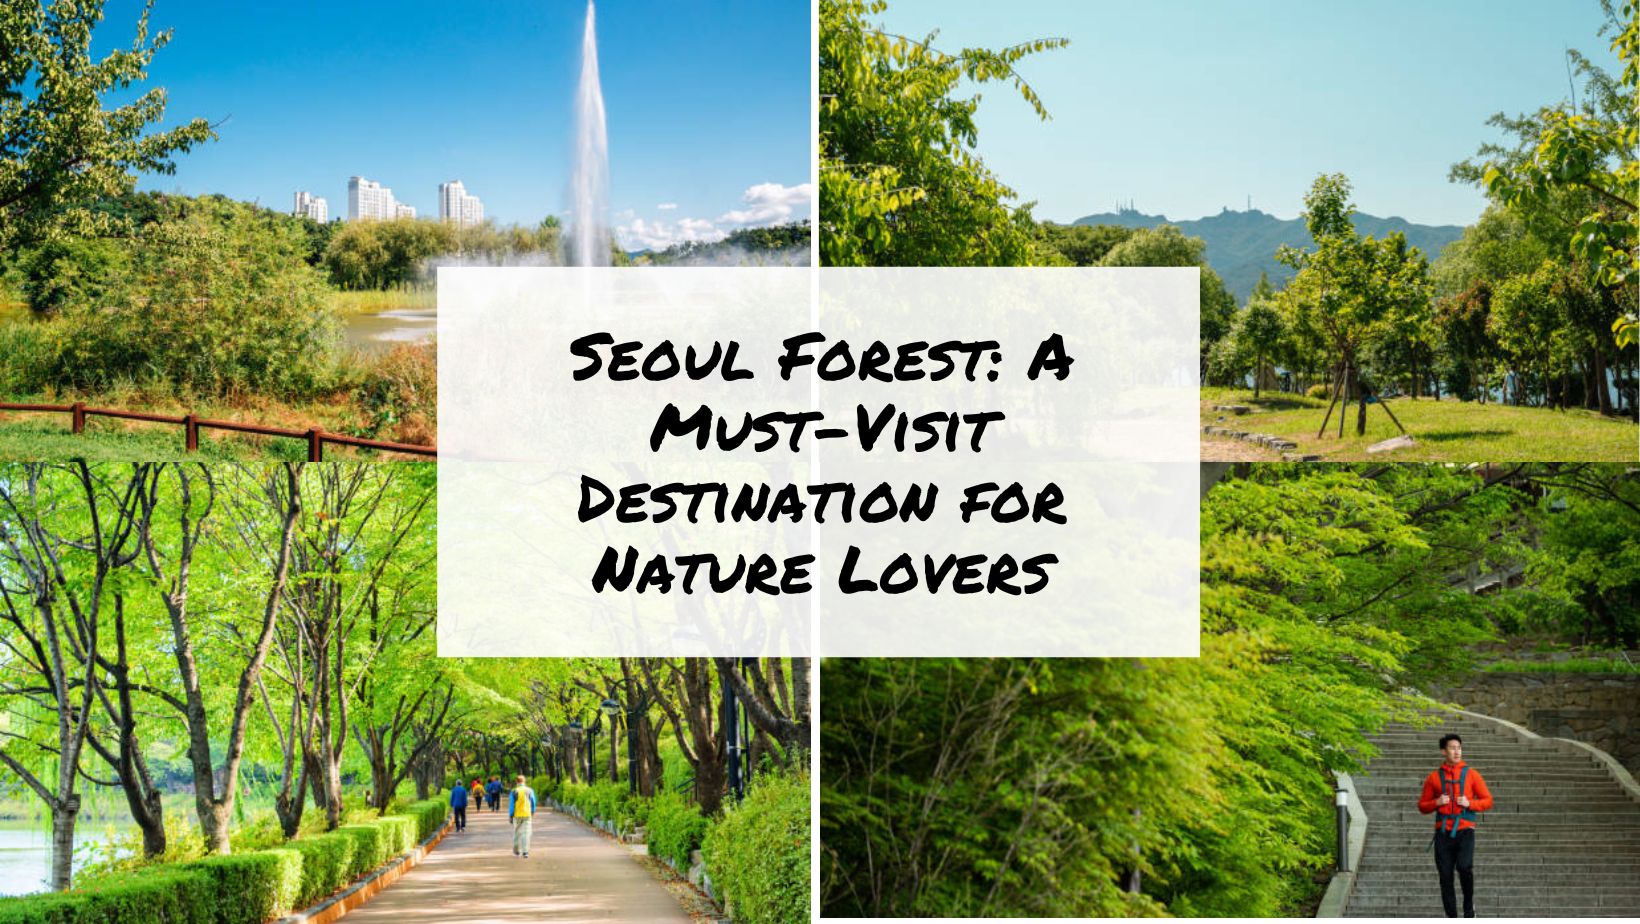 Seoul Forest A Must-Visit Destination for Nature Lovers